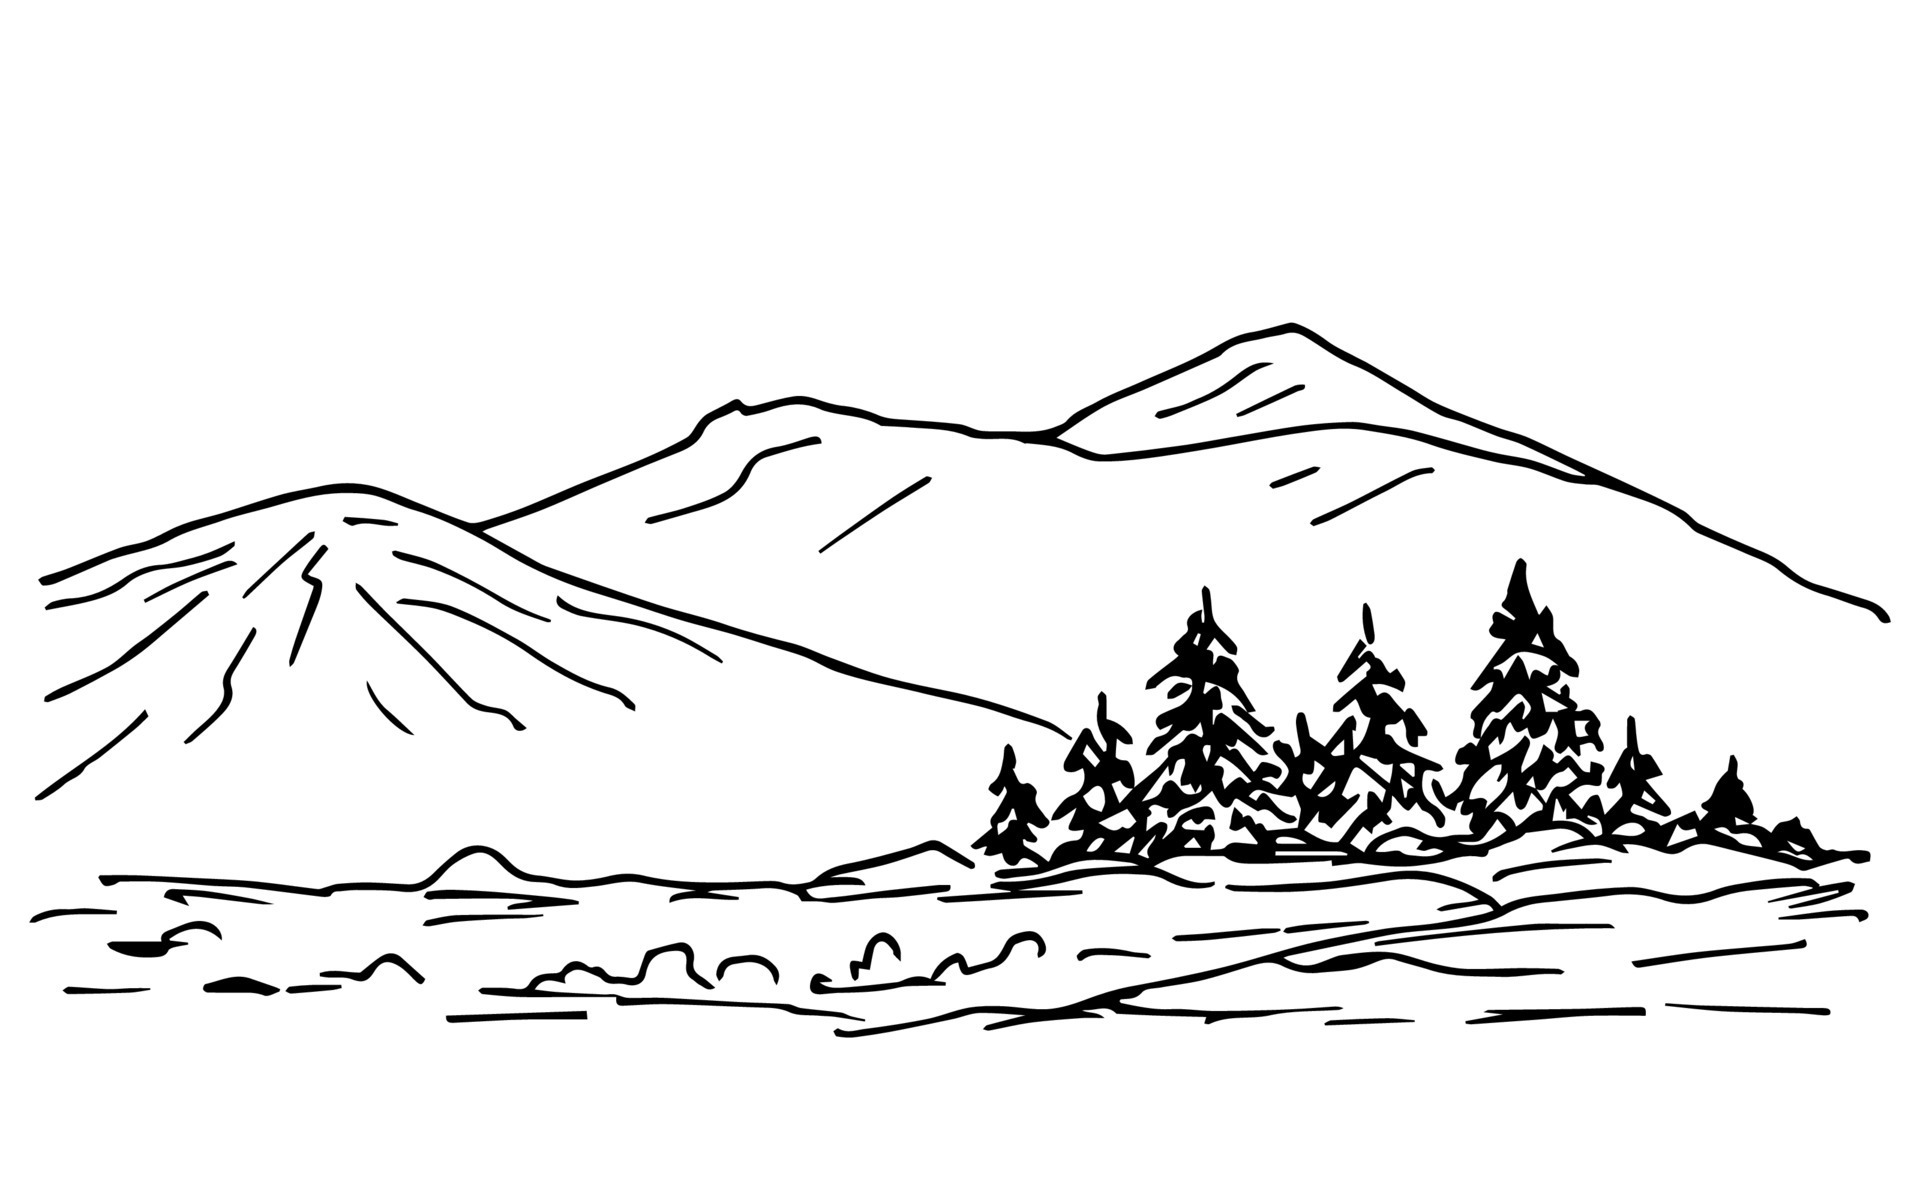 Mountain Sketch Vector Images (over 15,000)